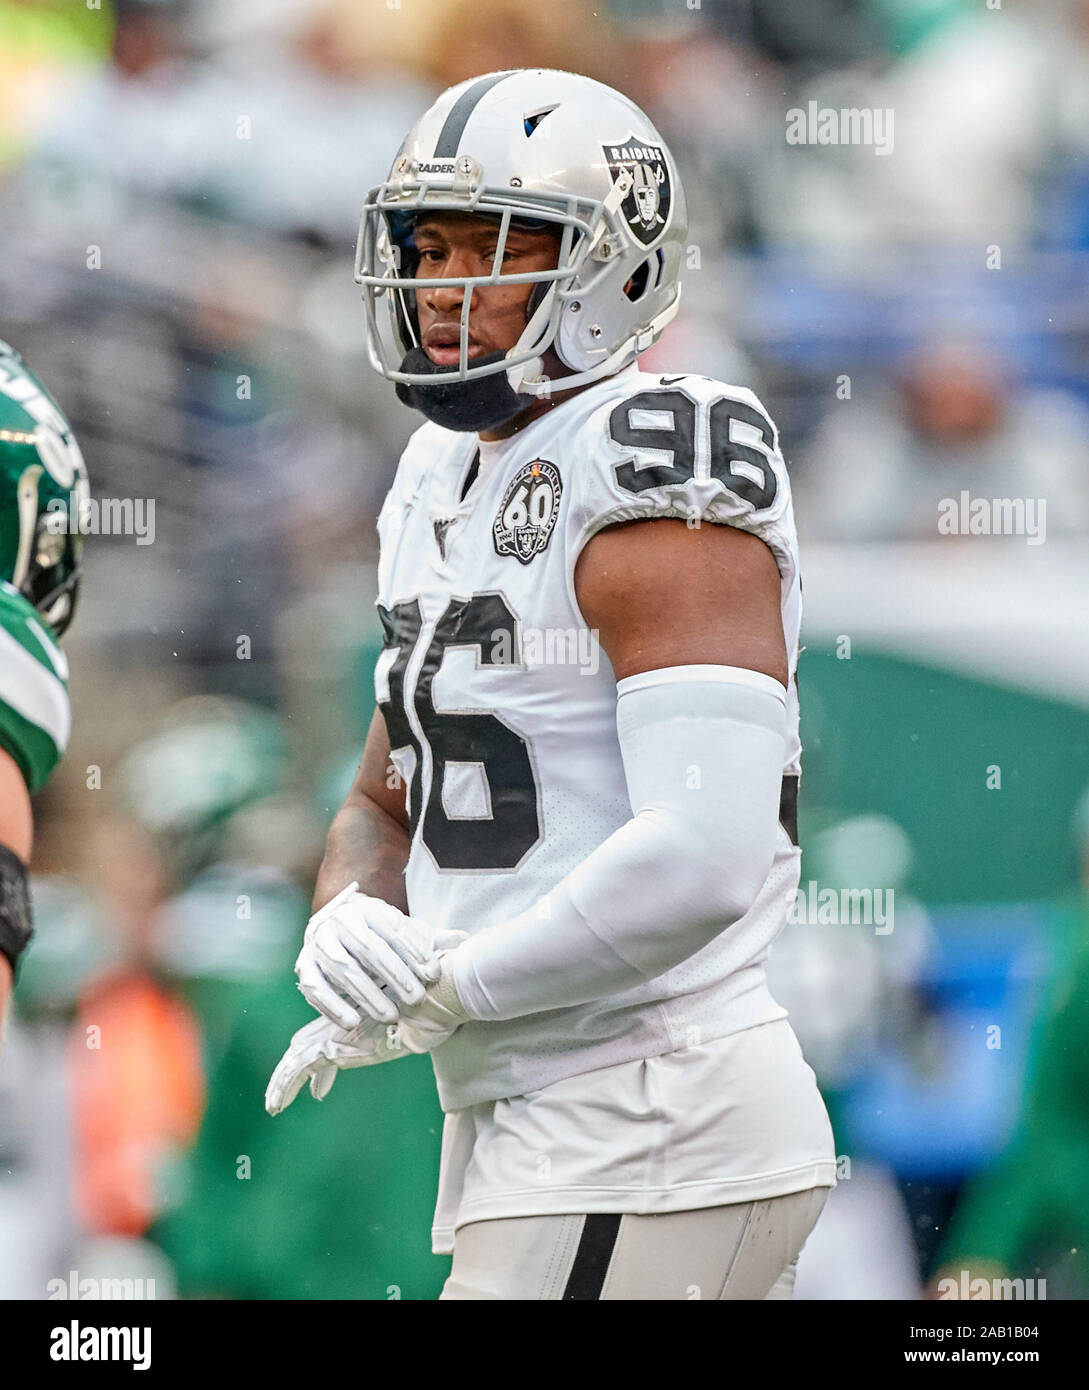 East Rutherford, New Jersey, USA. 24th Nov, 2019. Oakland Raiders defensive  end Clelin Ferrell (96) during a NFL game between the Oakland Raiders and  the New York Jets at MetLife Stadium in